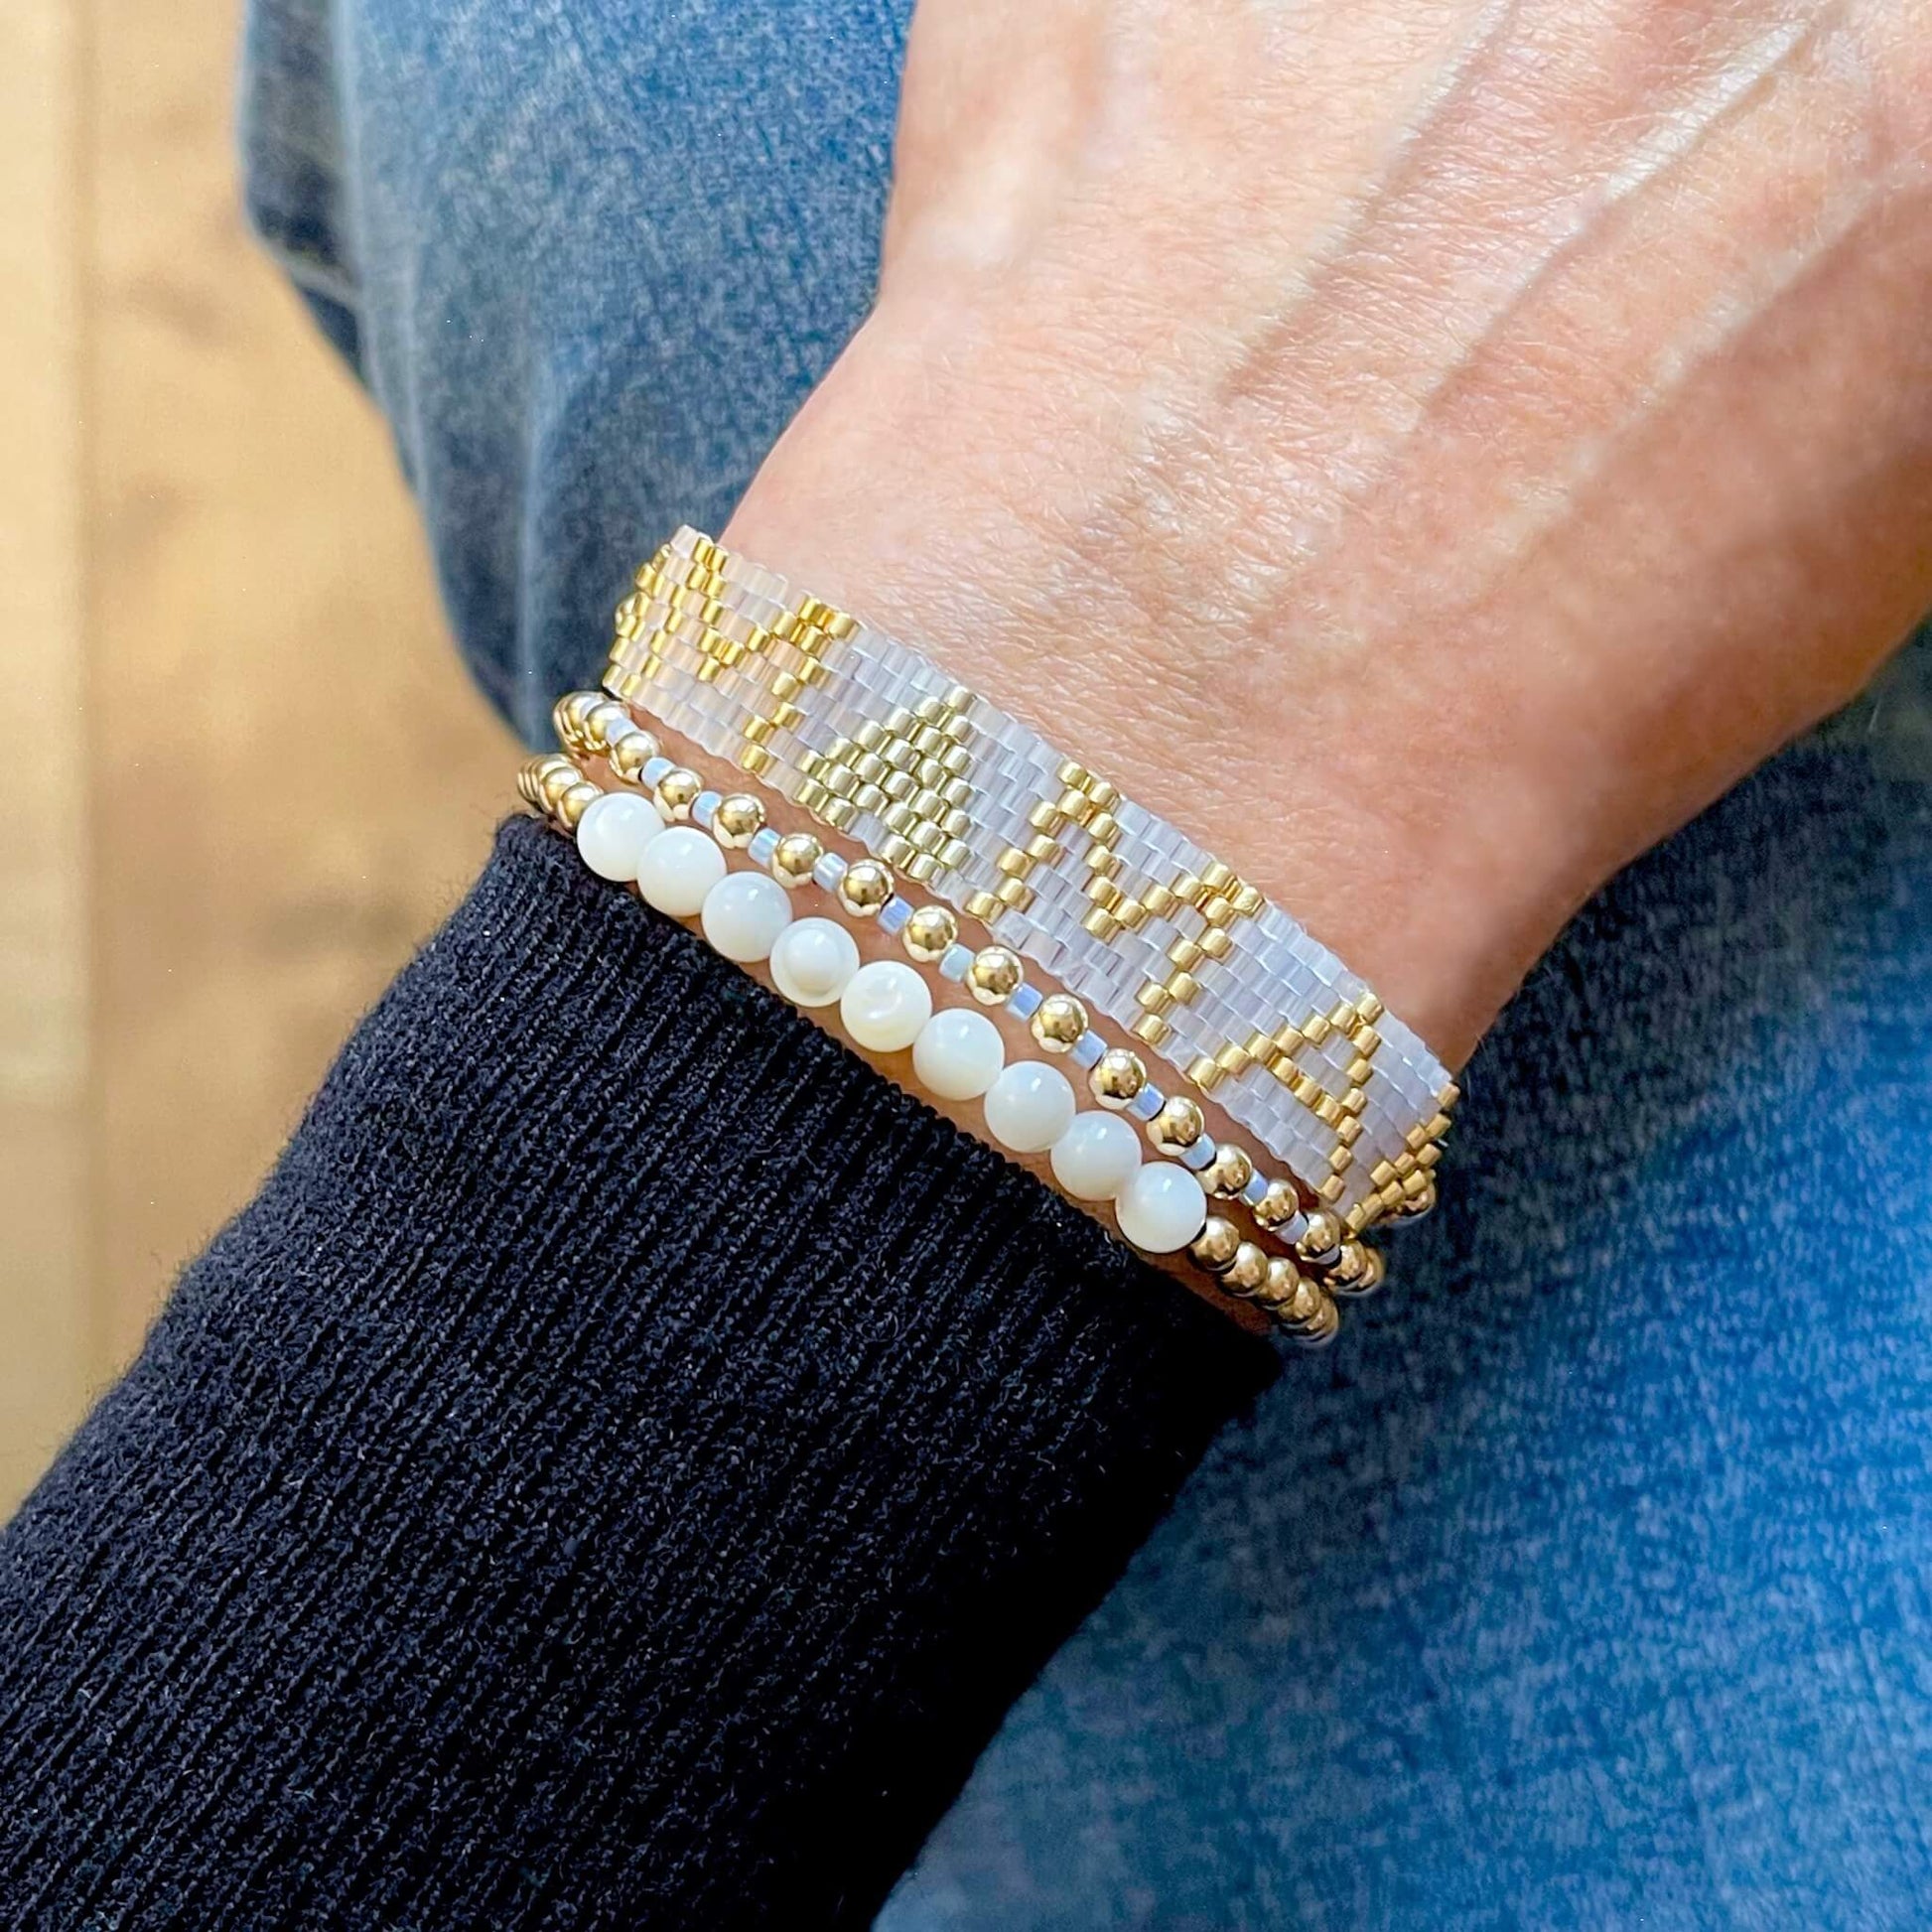 Mama beaded bracelet with blue and gold. Gold bead bracelet stack of 3 stretch bracelets with mother of pearl and gold beads.